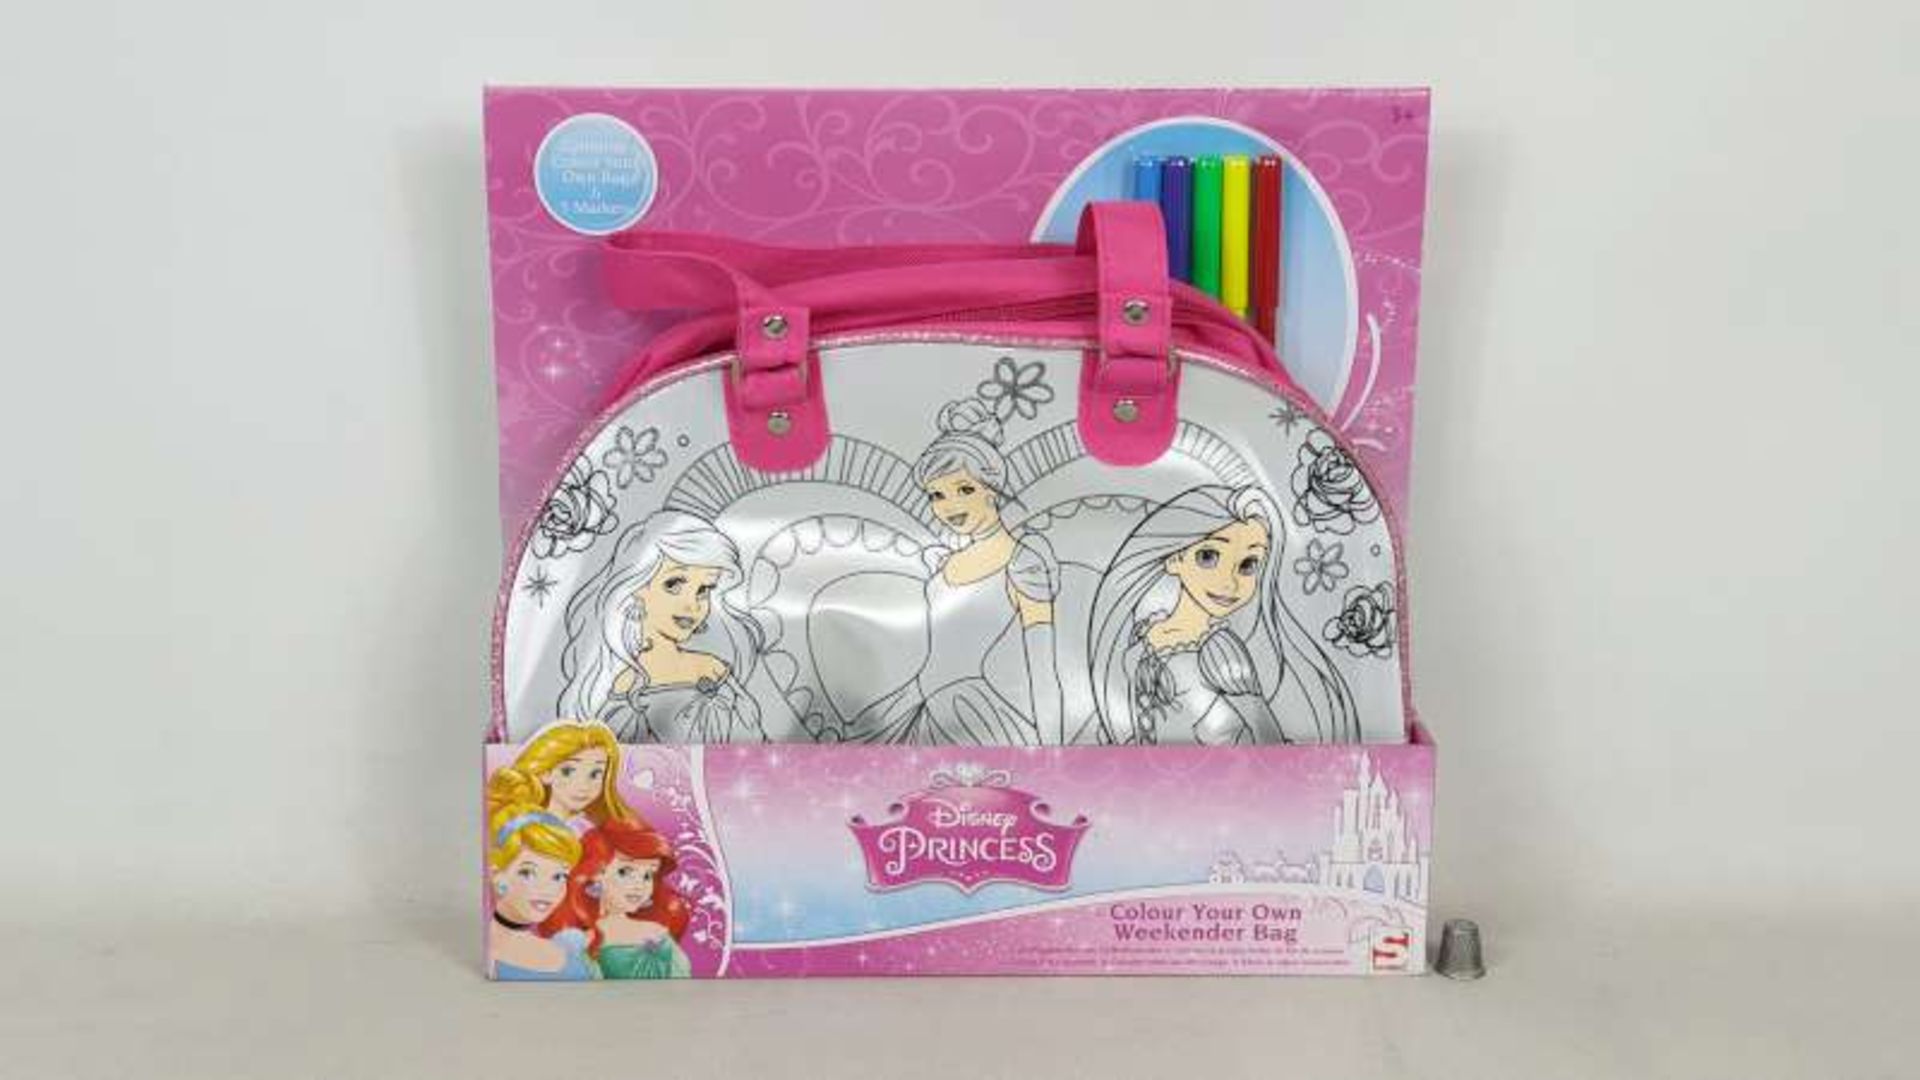 30 X BRAND NEW BOXED DISNEY PRINCESS COLOUR YOUR OWN WEEKEND BAG IN 5 BOXES